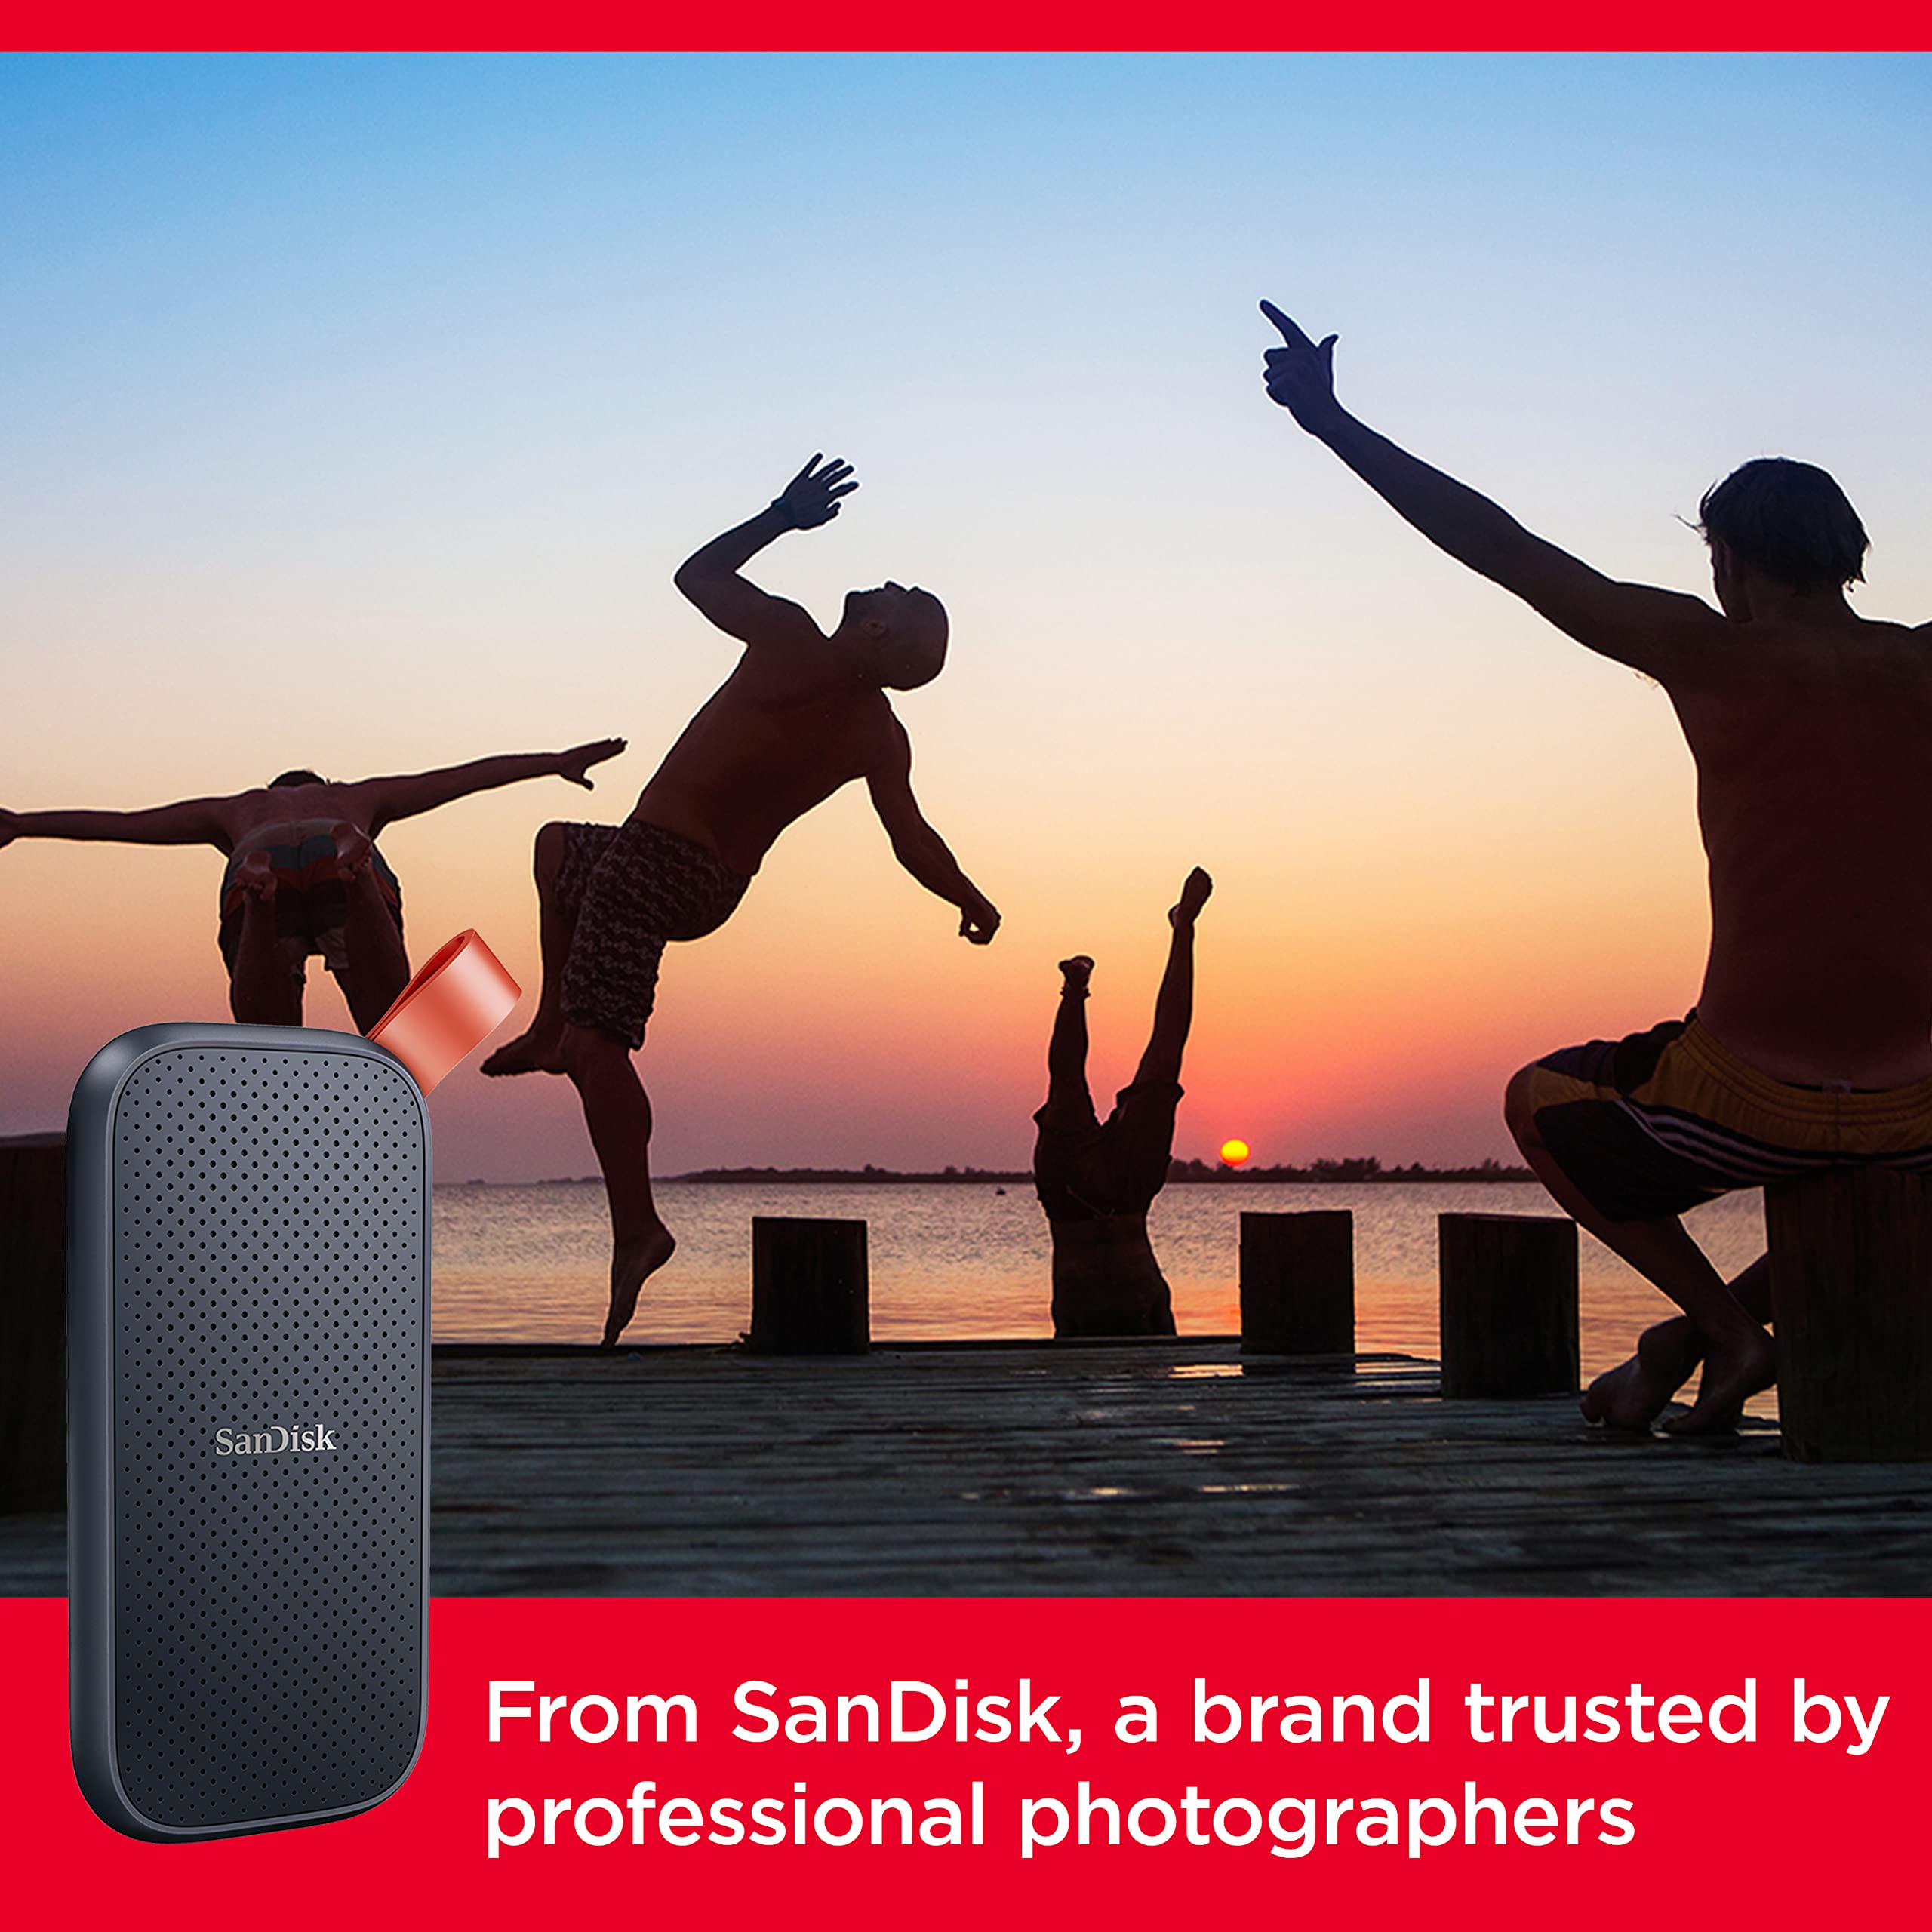 SanDisk 2TB Portable SSD - Up to 800MB/s, USB-C, USB 3.2 Gen 2, External Solid State Drive - SDSSDE30-2T00-G26